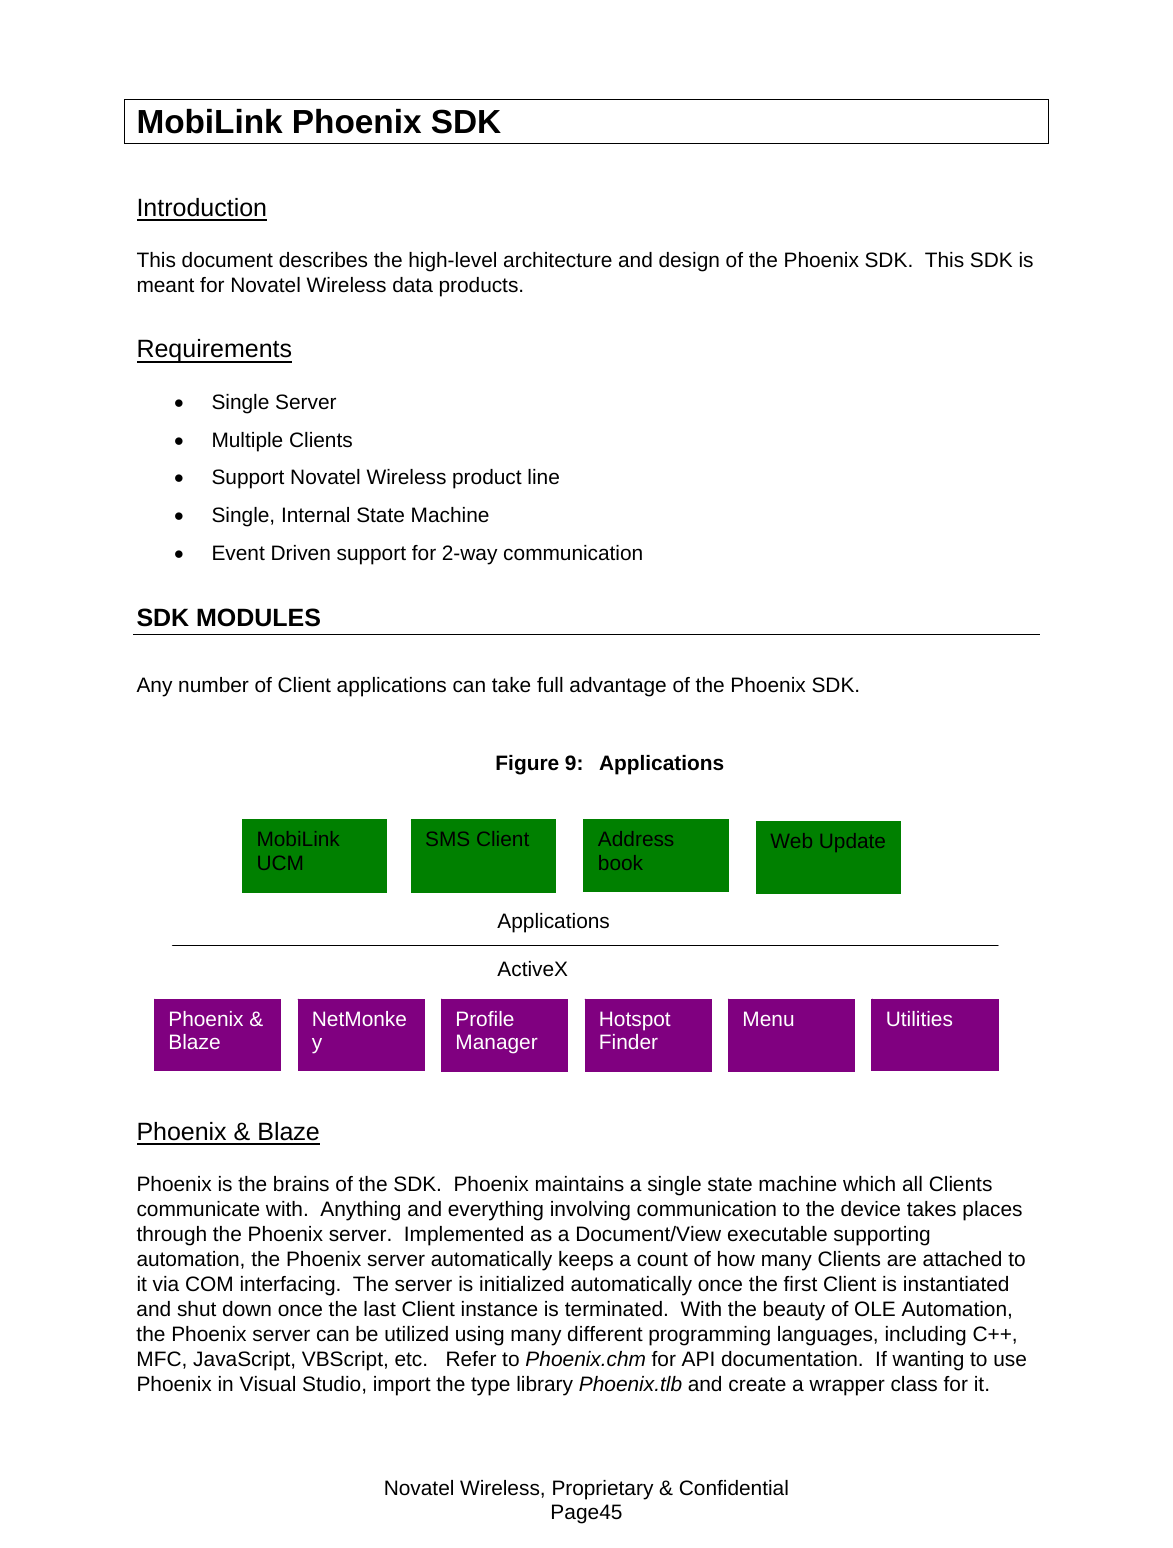 Novatel Wireless, Proprietary &amp; Confidential Page45 MobiLink Phoenix SDK Introduction This document describes the high-level architecture and design of the Phoenix SDK.  This SDK is meant for Novatel Wireless data products. Requirements • Single Server • Multiple Clients •  Support Novatel Wireless product line •  Single, Internal State Machine •  Event Driven support for 2-way communication SDK MODULES Any number of Client applications can take full advantage of the Phoenix SDK.  Figure 9:  Applications   Phoenix &amp; Blaze Phoenix is the brains of the SDK.  Phoenix maintains a single state machine which all Clients communicate with.  Anything and everything involving communication to the device takes places through the Phoenix server.  Implemented as a Document/View executable supporting automation, the Phoenix server automatically keeps a count of how many Clients are attached to it via COM interfacing.  The server is initialized automatically once the first Client is instantiated and shut down once the last Client instance is terminated.  With the beauty of OLE Automation, the Phoenix server can be utilized using many different programming languages, including C++, MFC, JavaScript, VBScript, etc.   Refer to Phoenix.chm for API documentation.  If wanting to use Phoenix in Visual Studio, import the type library Phoenix.tlb and create a wrapper class for it.  Applications ActiveX MobiLink UCM  SMS Client  Address book  Web Update Profile Manager  Hotspot Finder  Menu  Utilities  NetMonkey Phoenix &amp; Blaze 